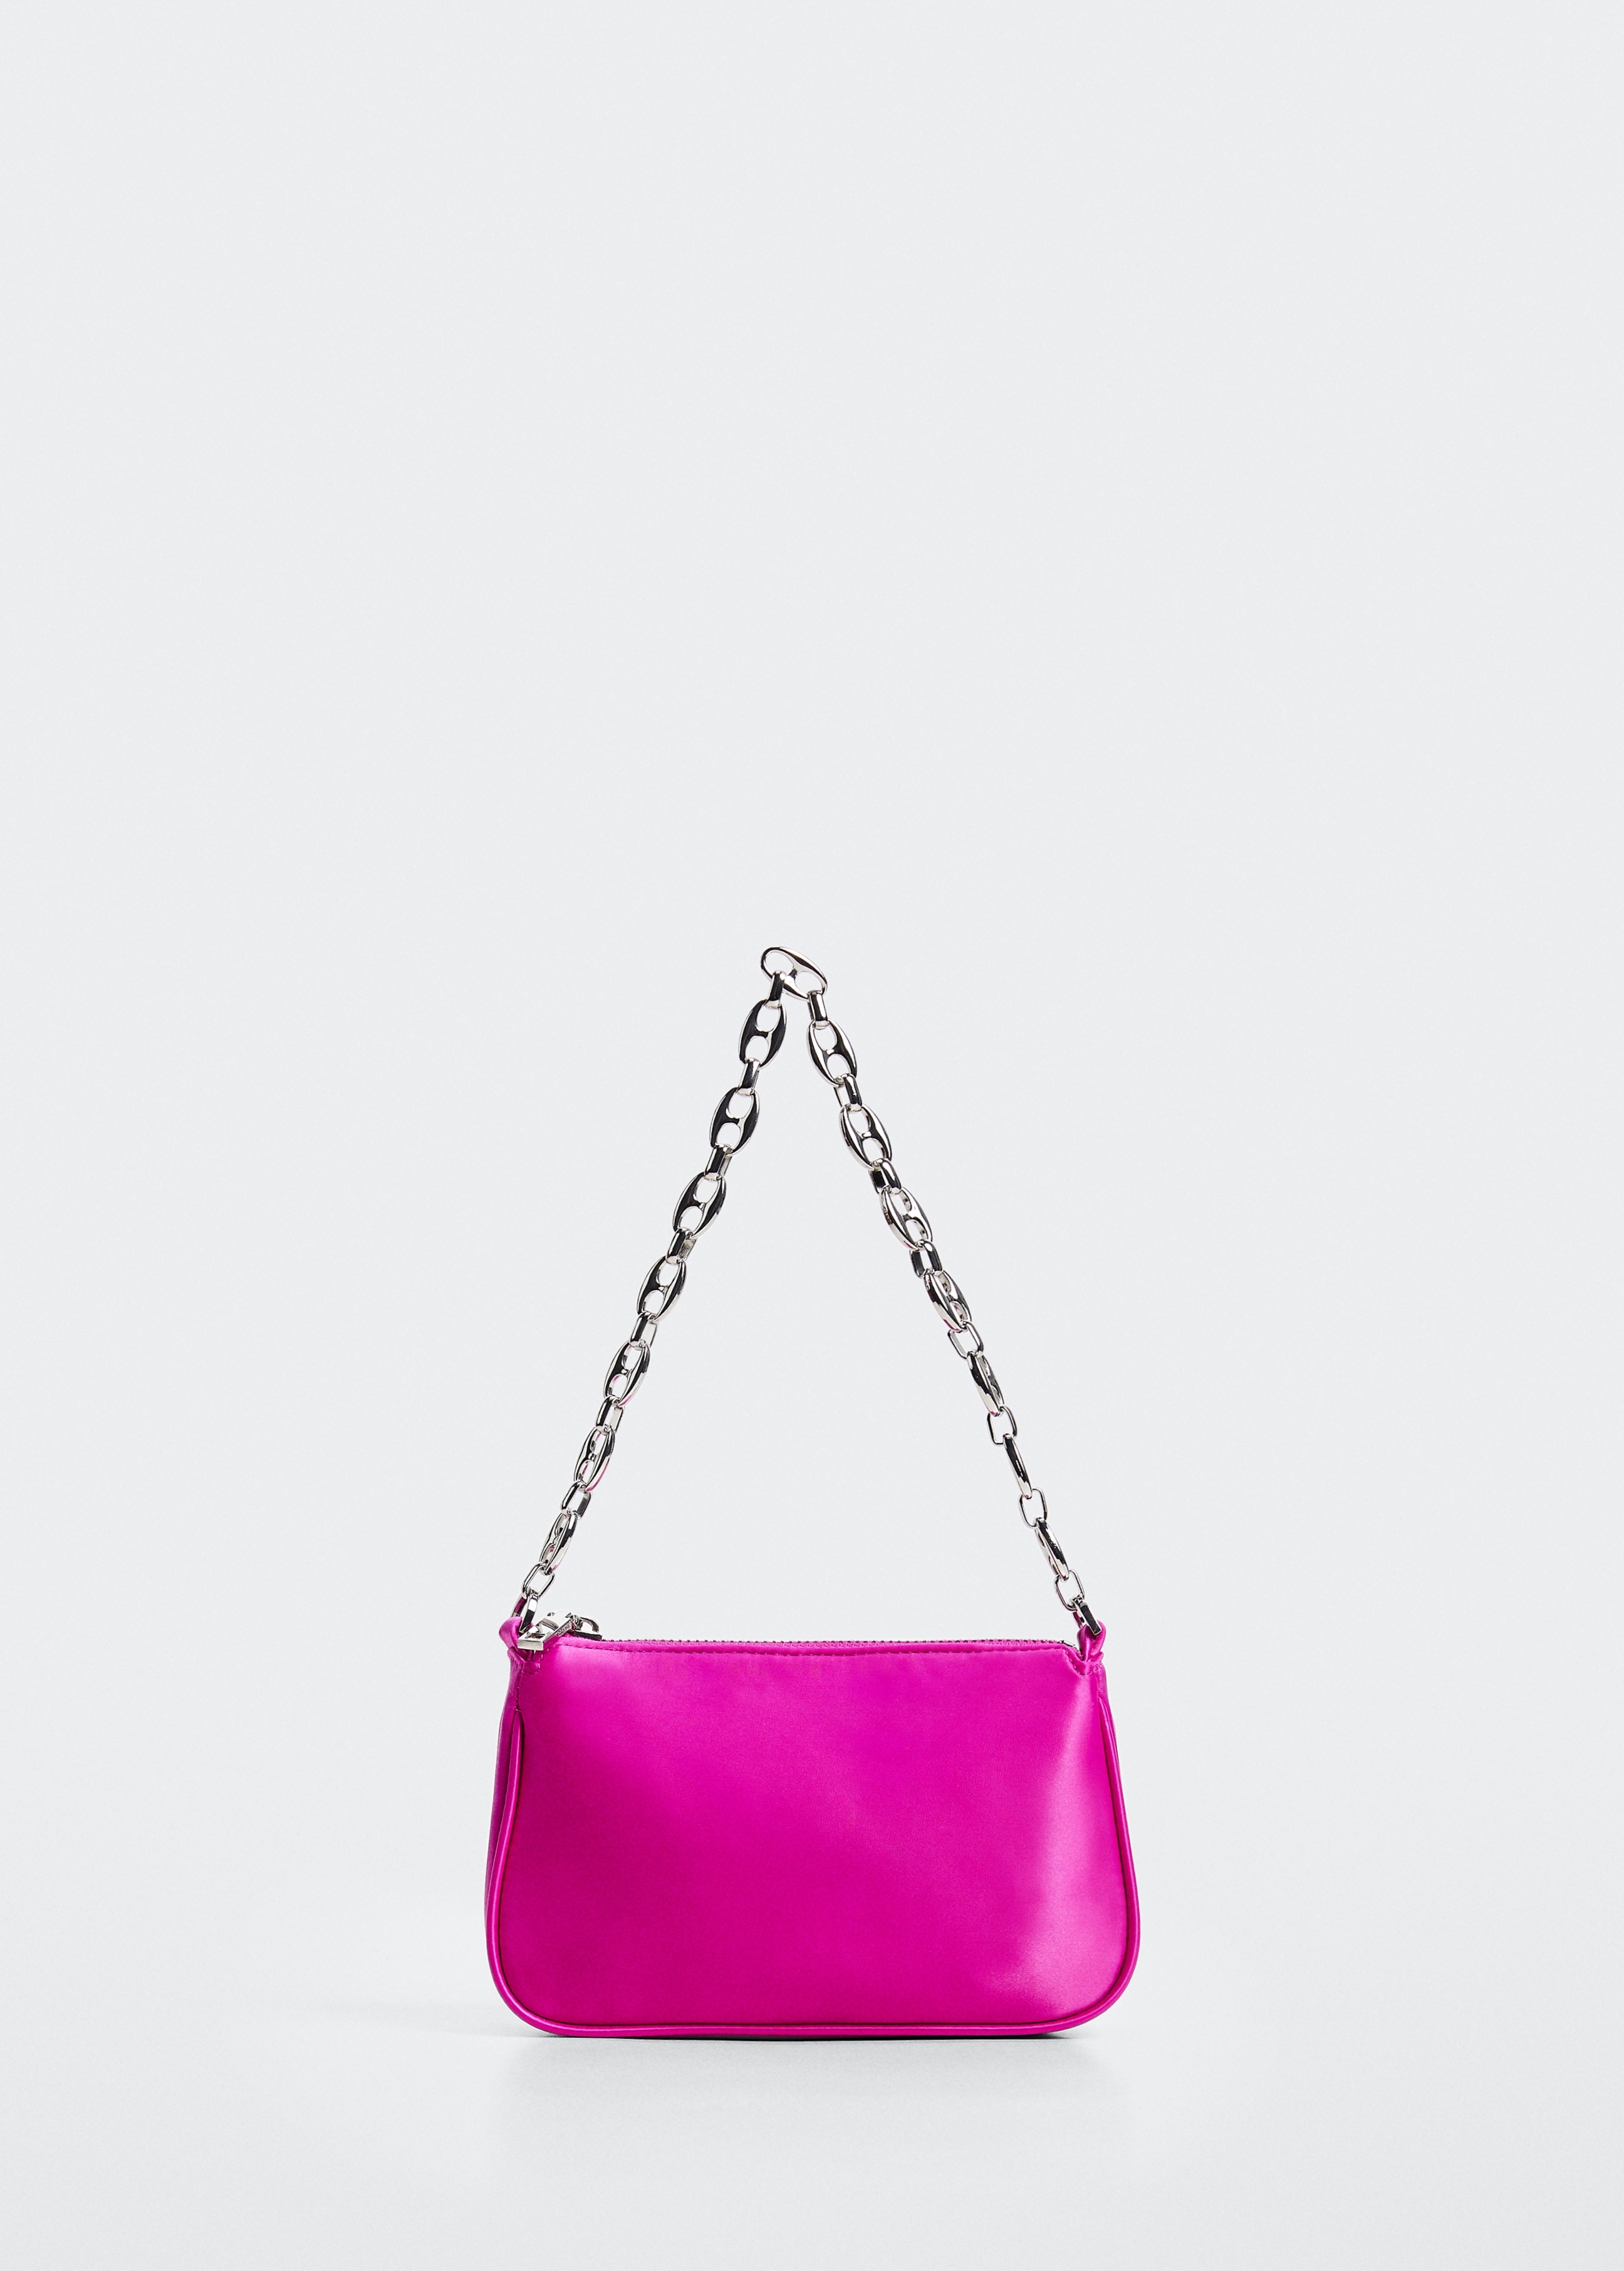 Satin chain bag - Article without model